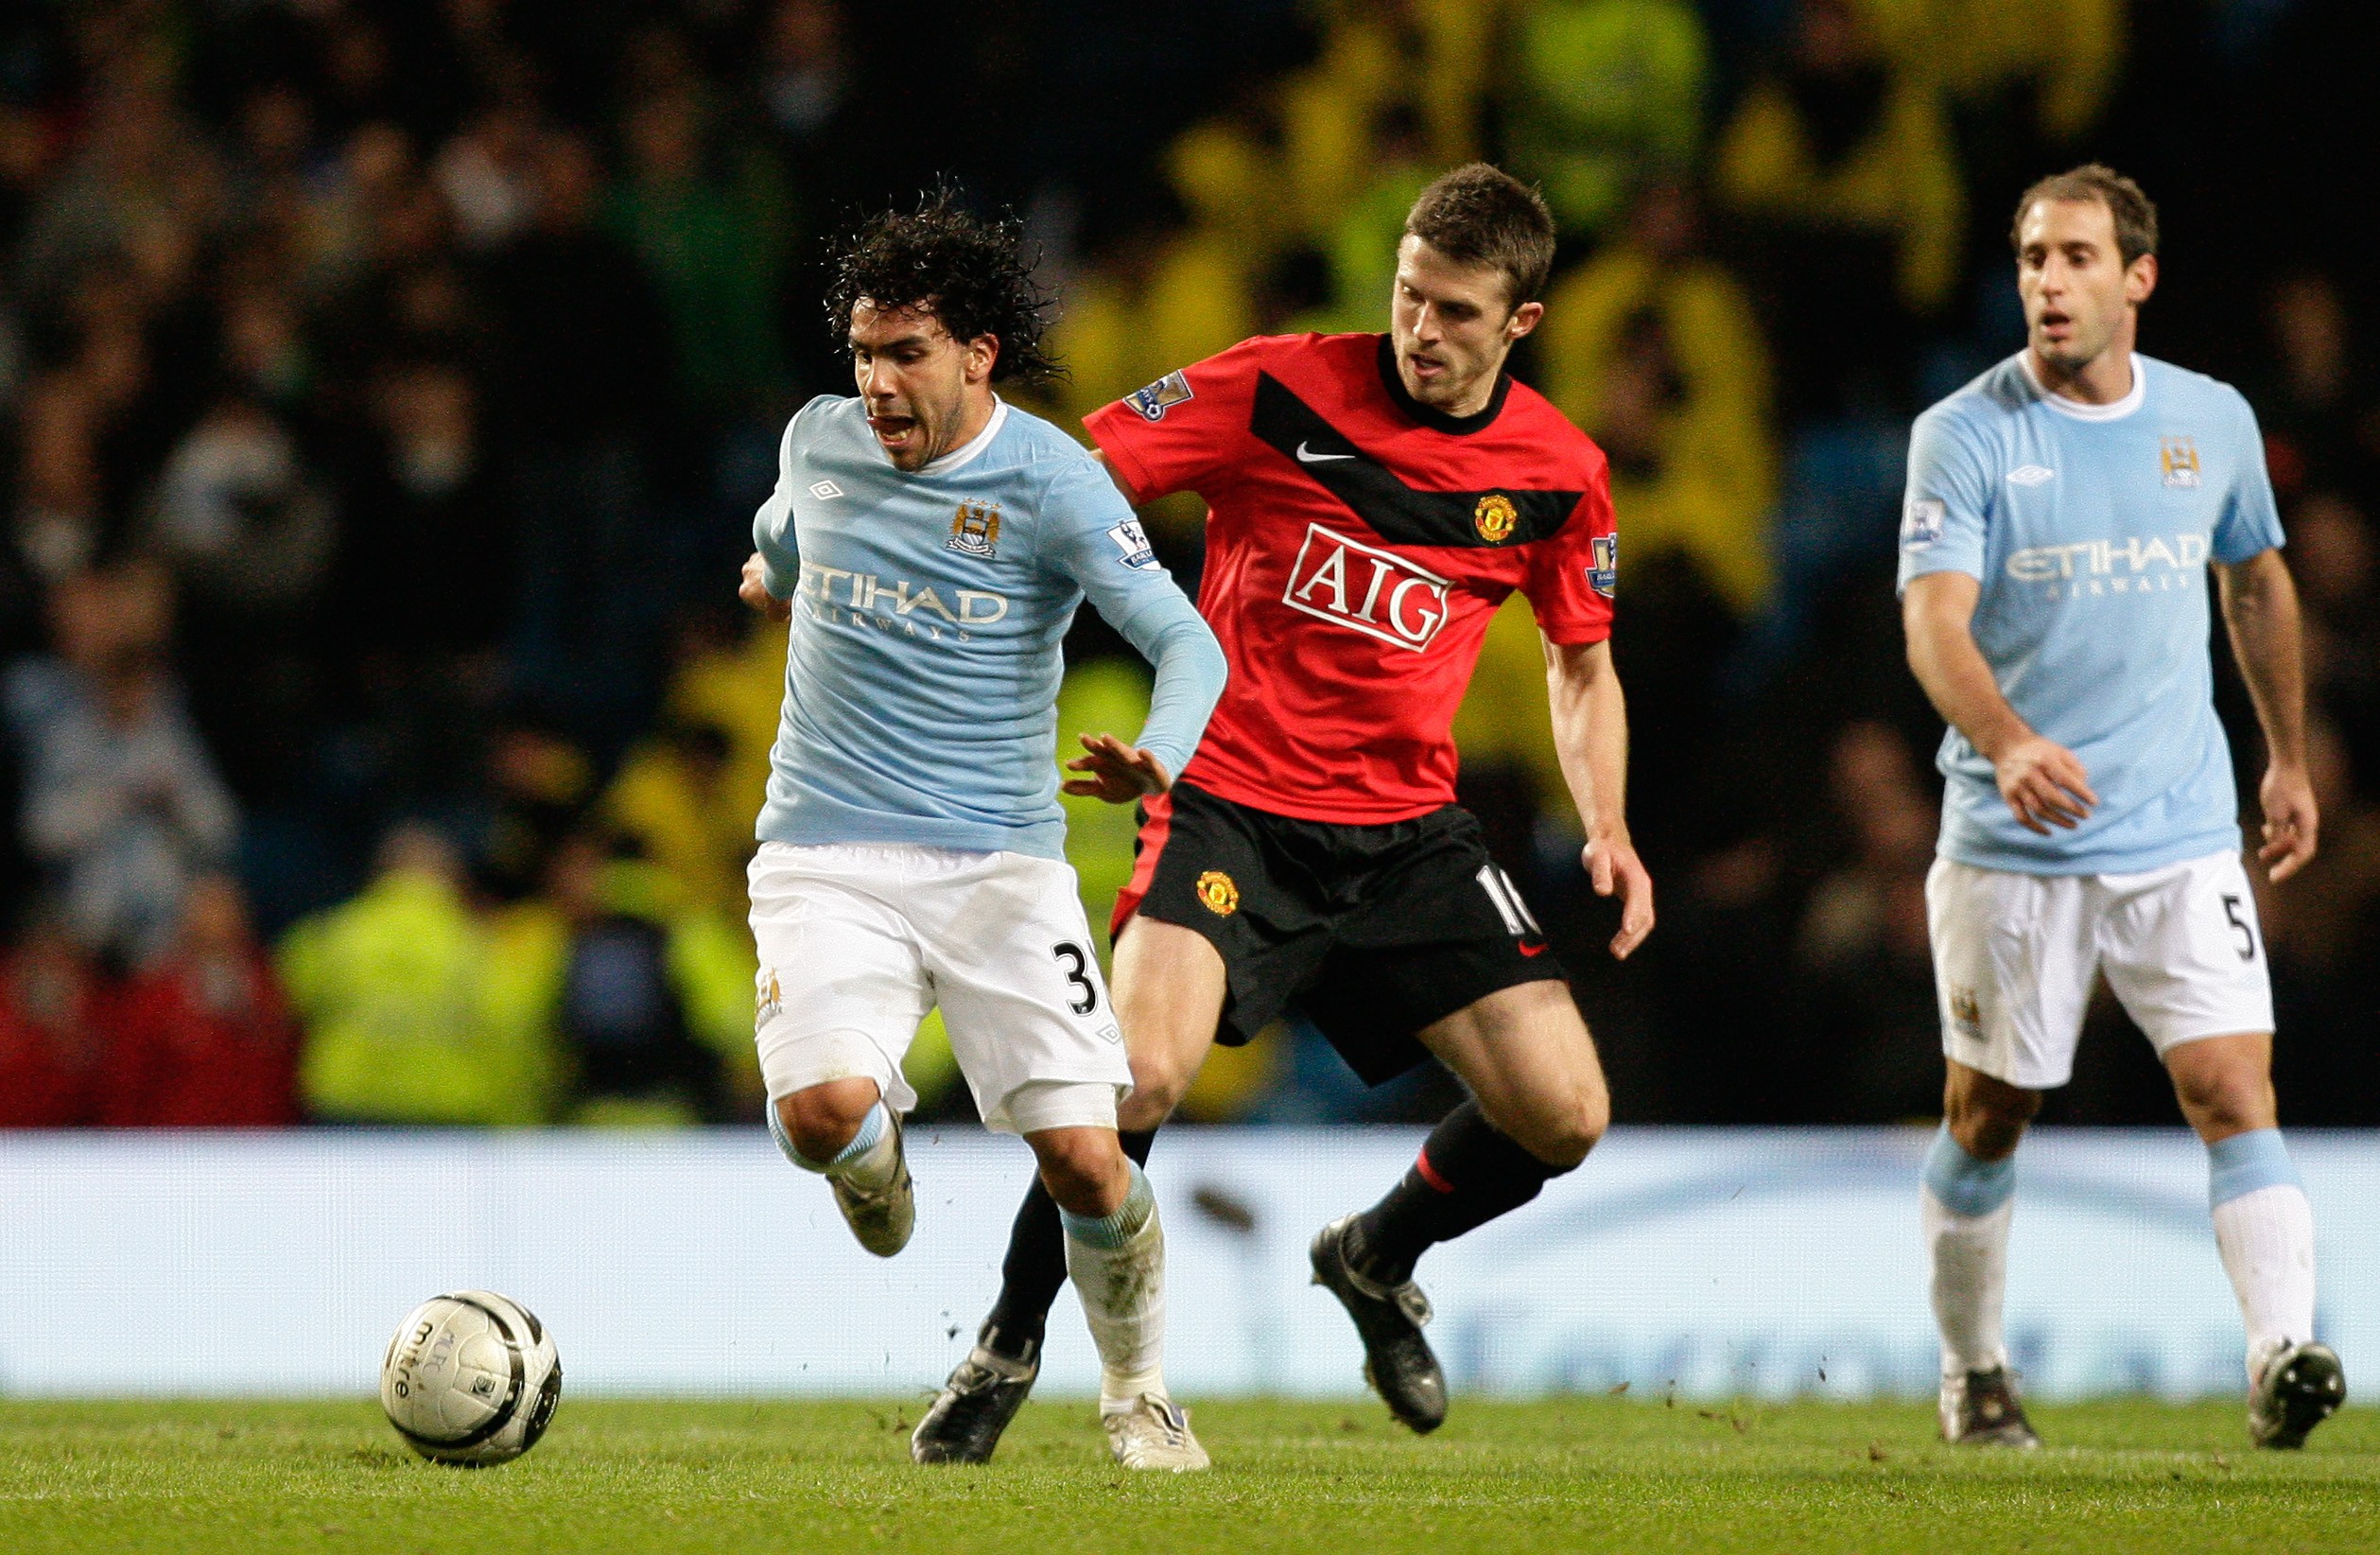 Carling Cup, Carlos Tevez, United, City, Manchester